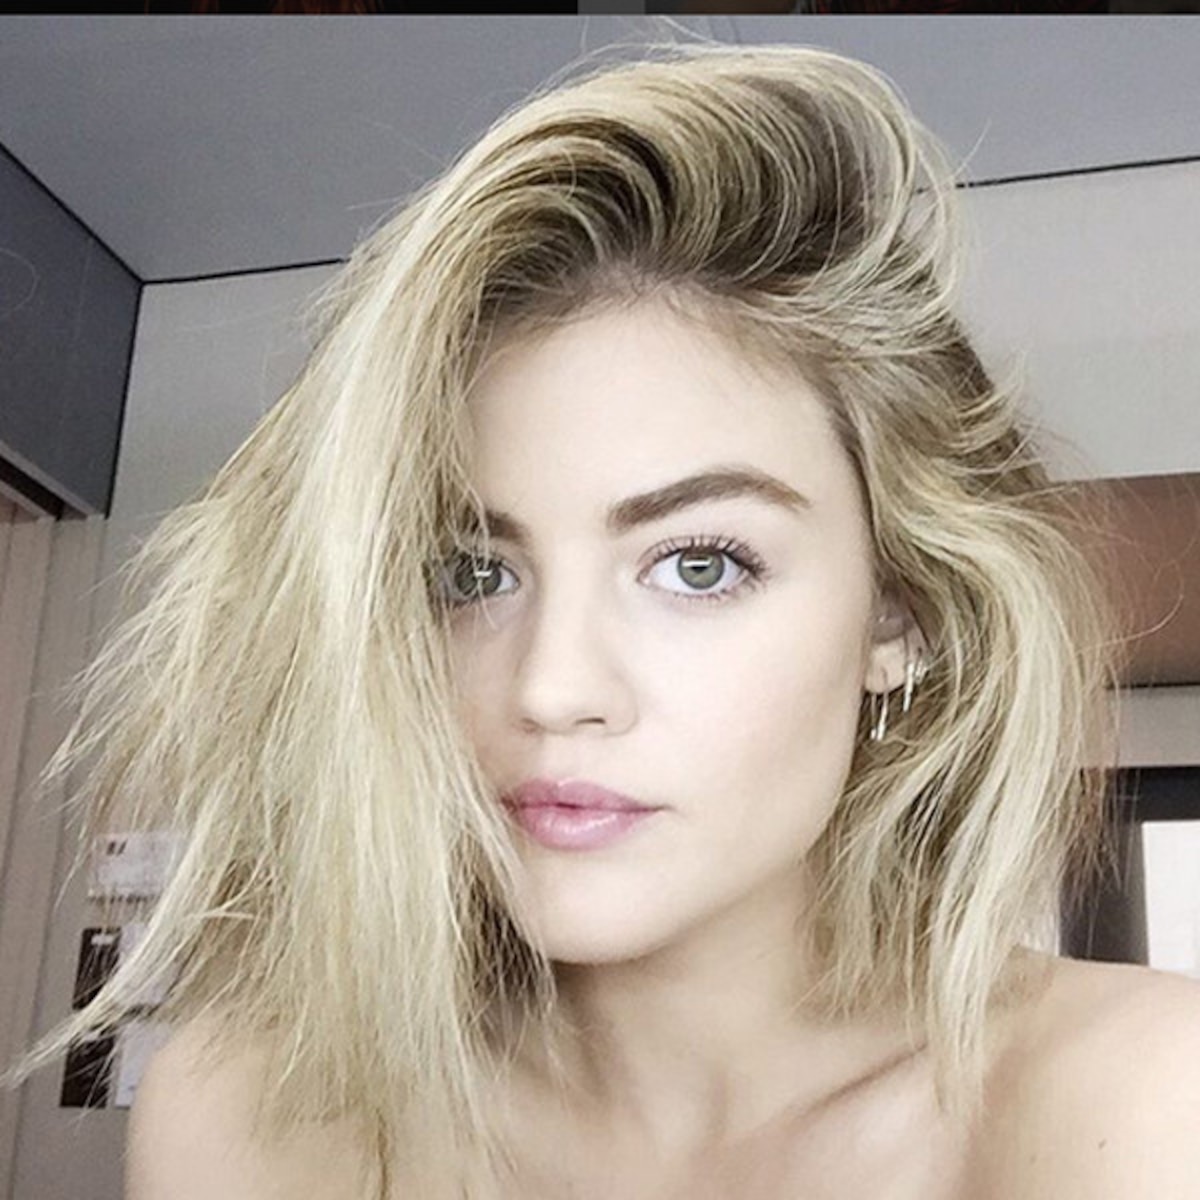 brenda round recommends Lucy Hale Leaked Topless Pictures